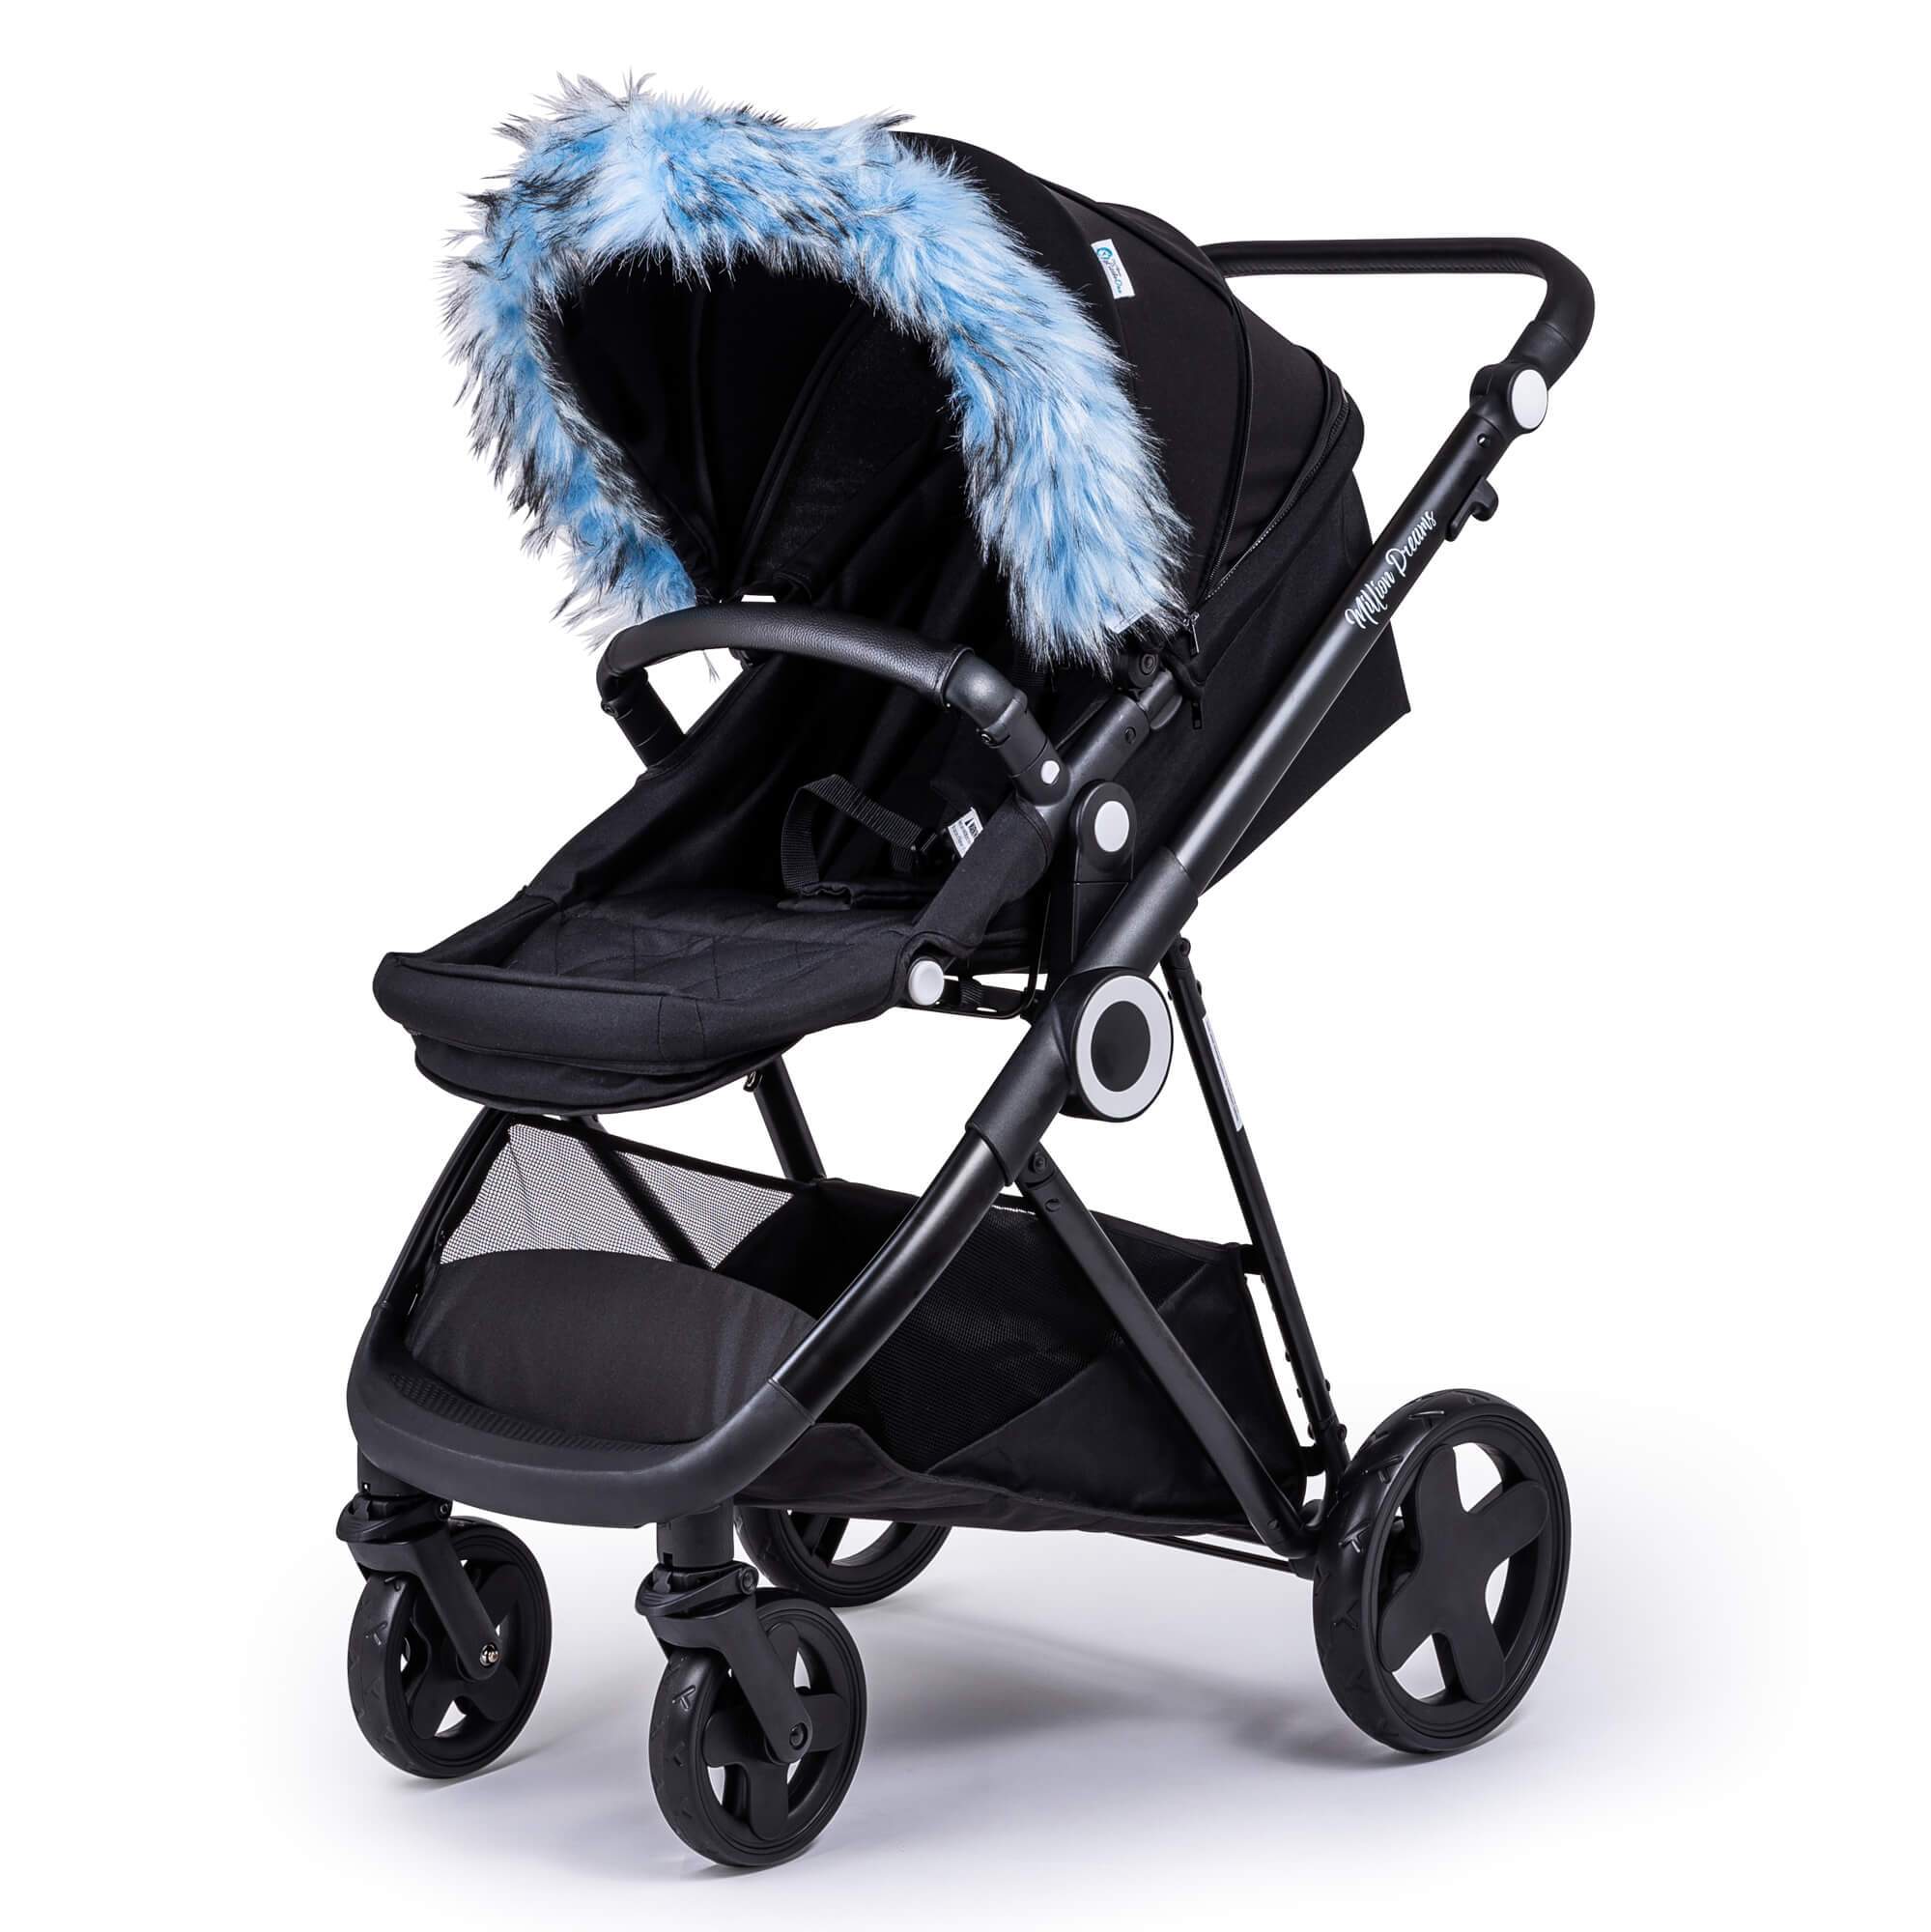 Pram Fur Hood Trim Attachment for Pushchair Compatible with Bebecar - Light Blue / Fits All Models | For Your Little One